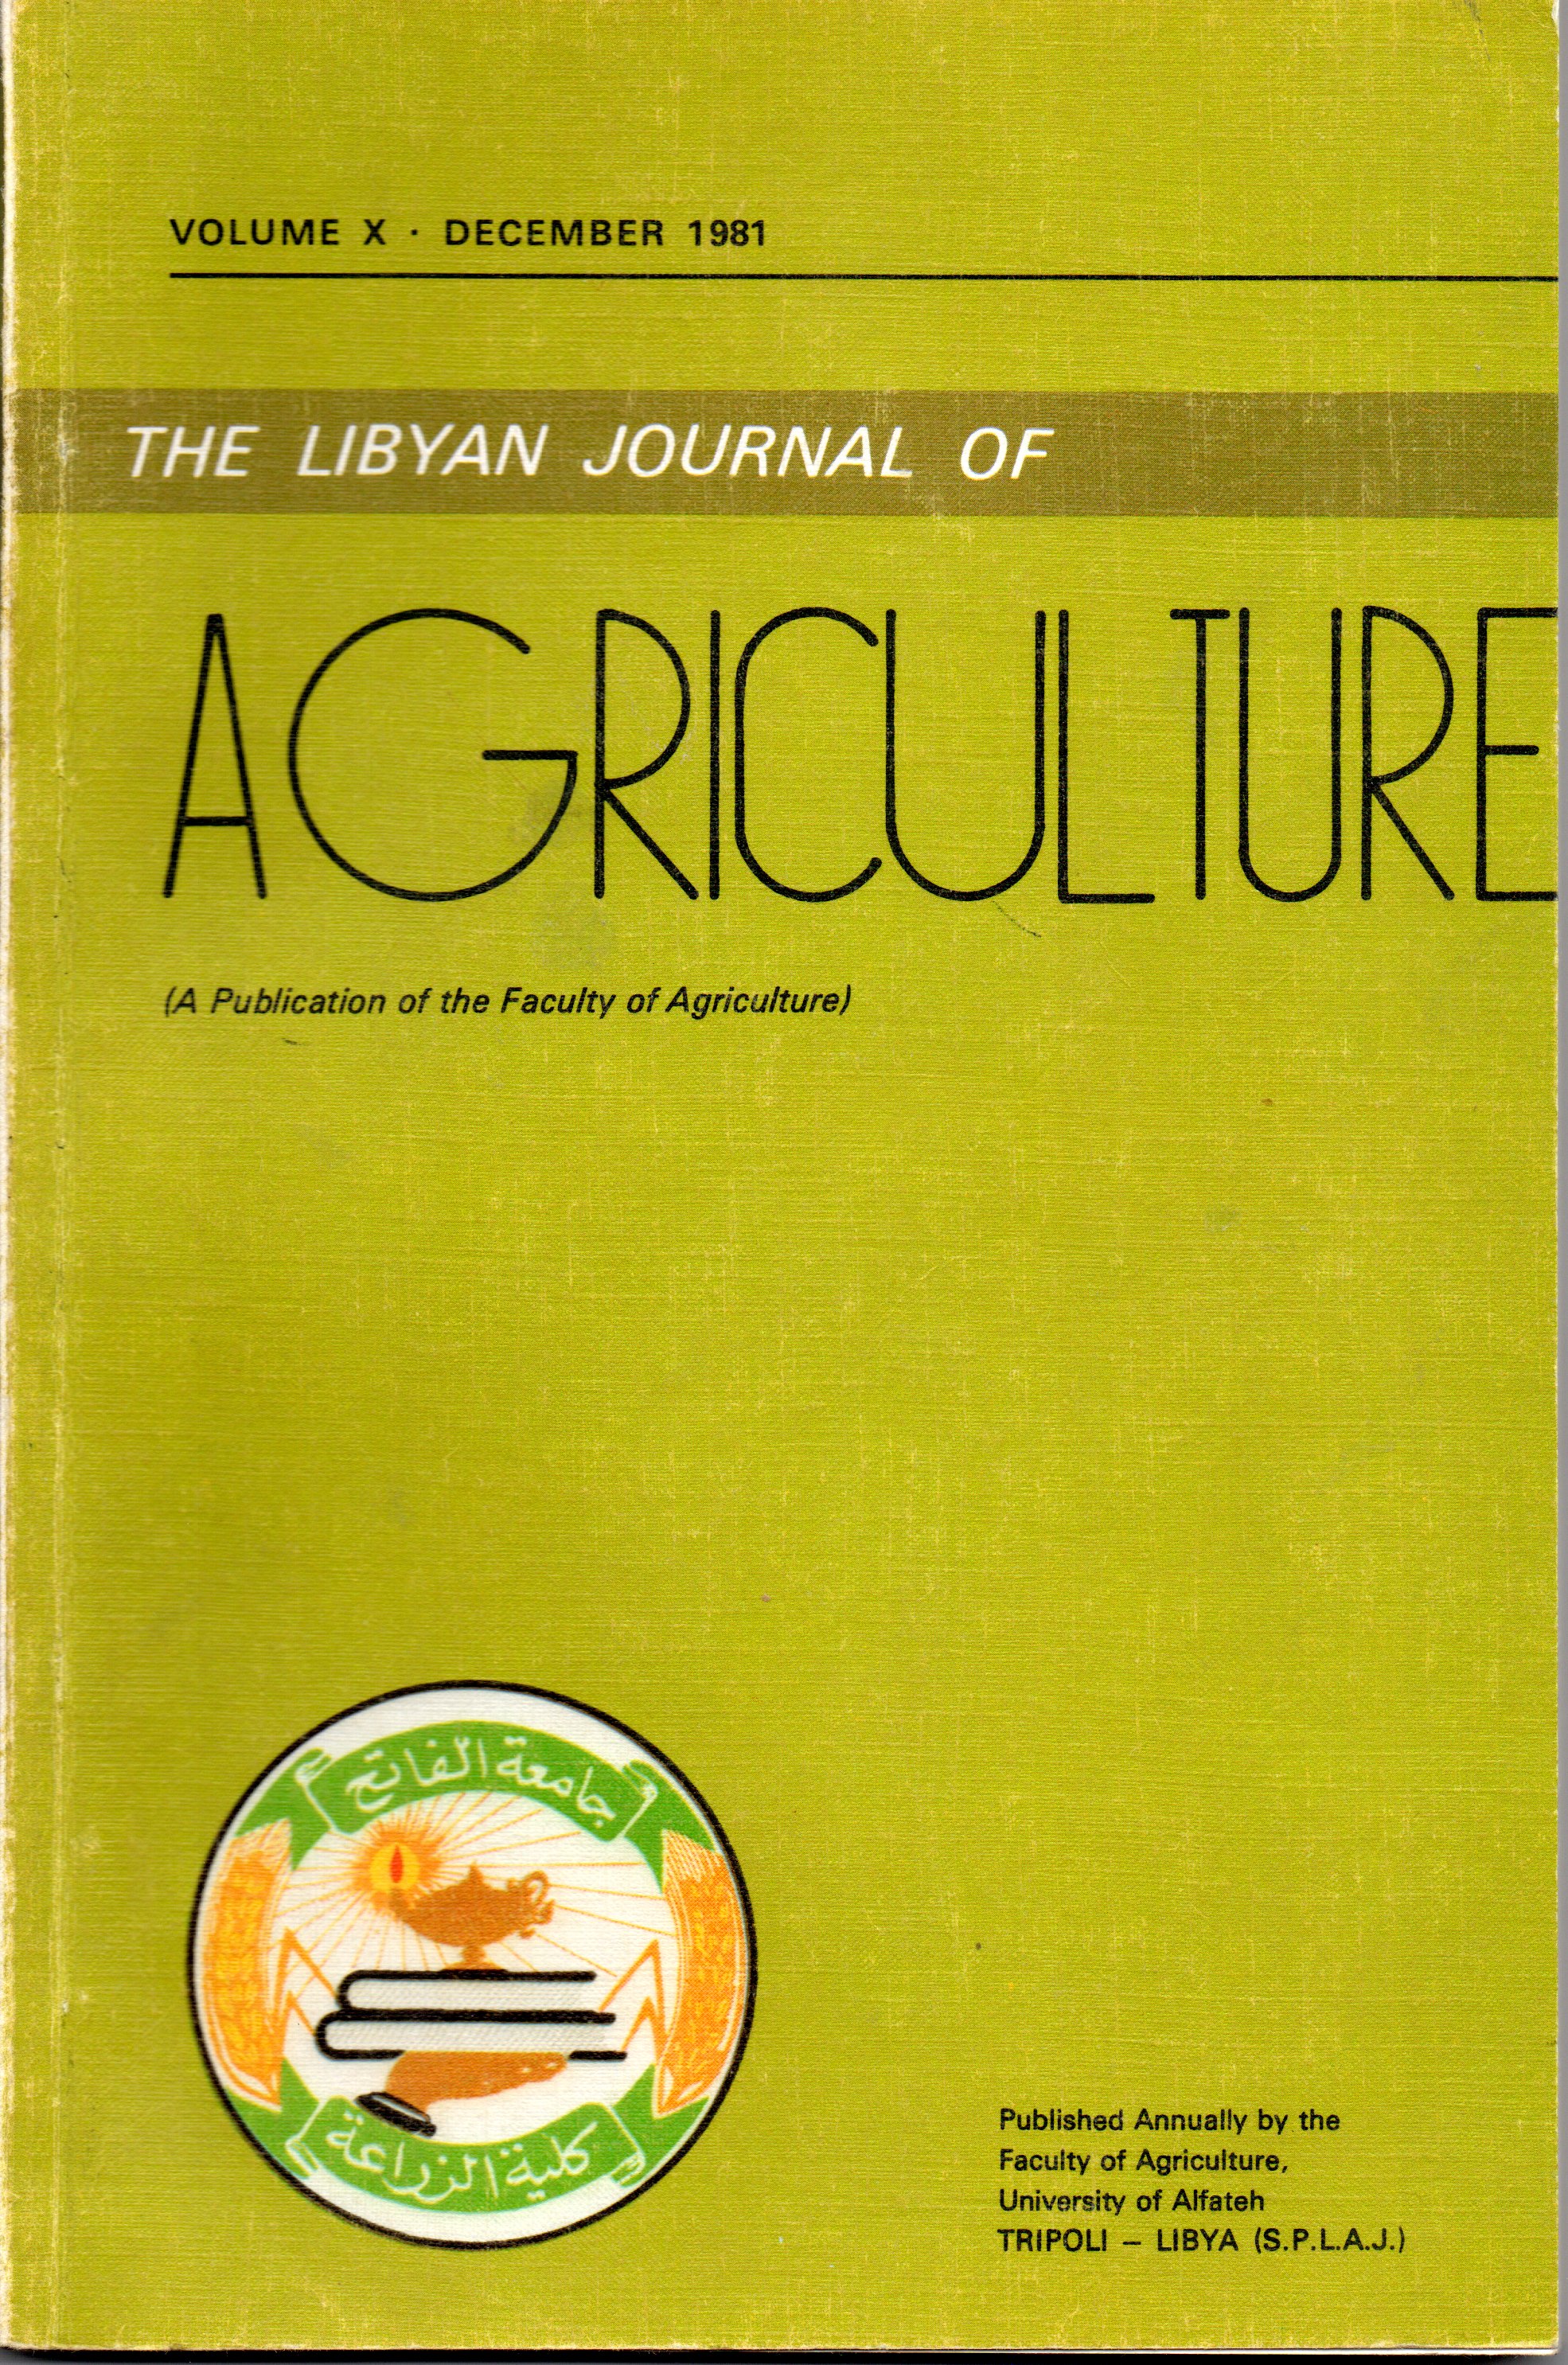 					View Vol. 10 No. 1 (1981): The Libyan Journal of Agriculture
				